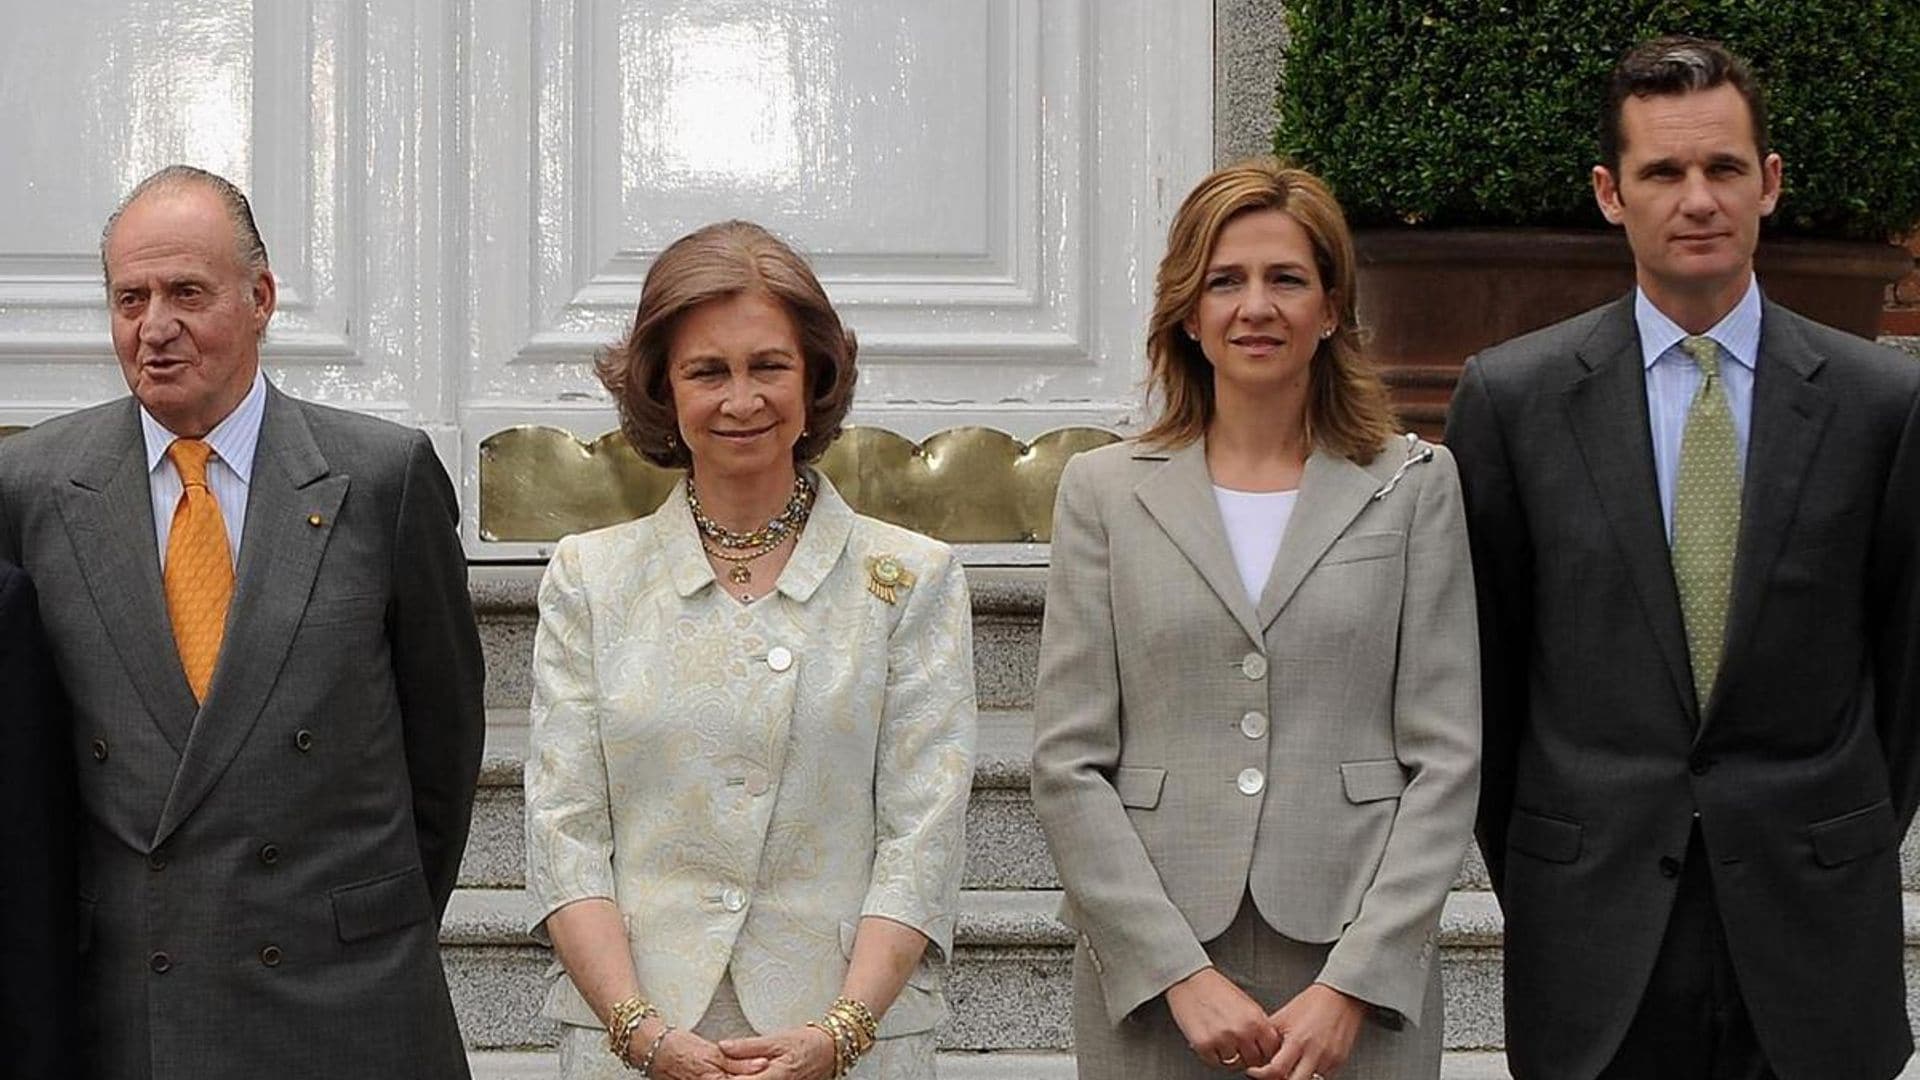 Spanish royal releases statement on marriage after husband was pictured with another woman